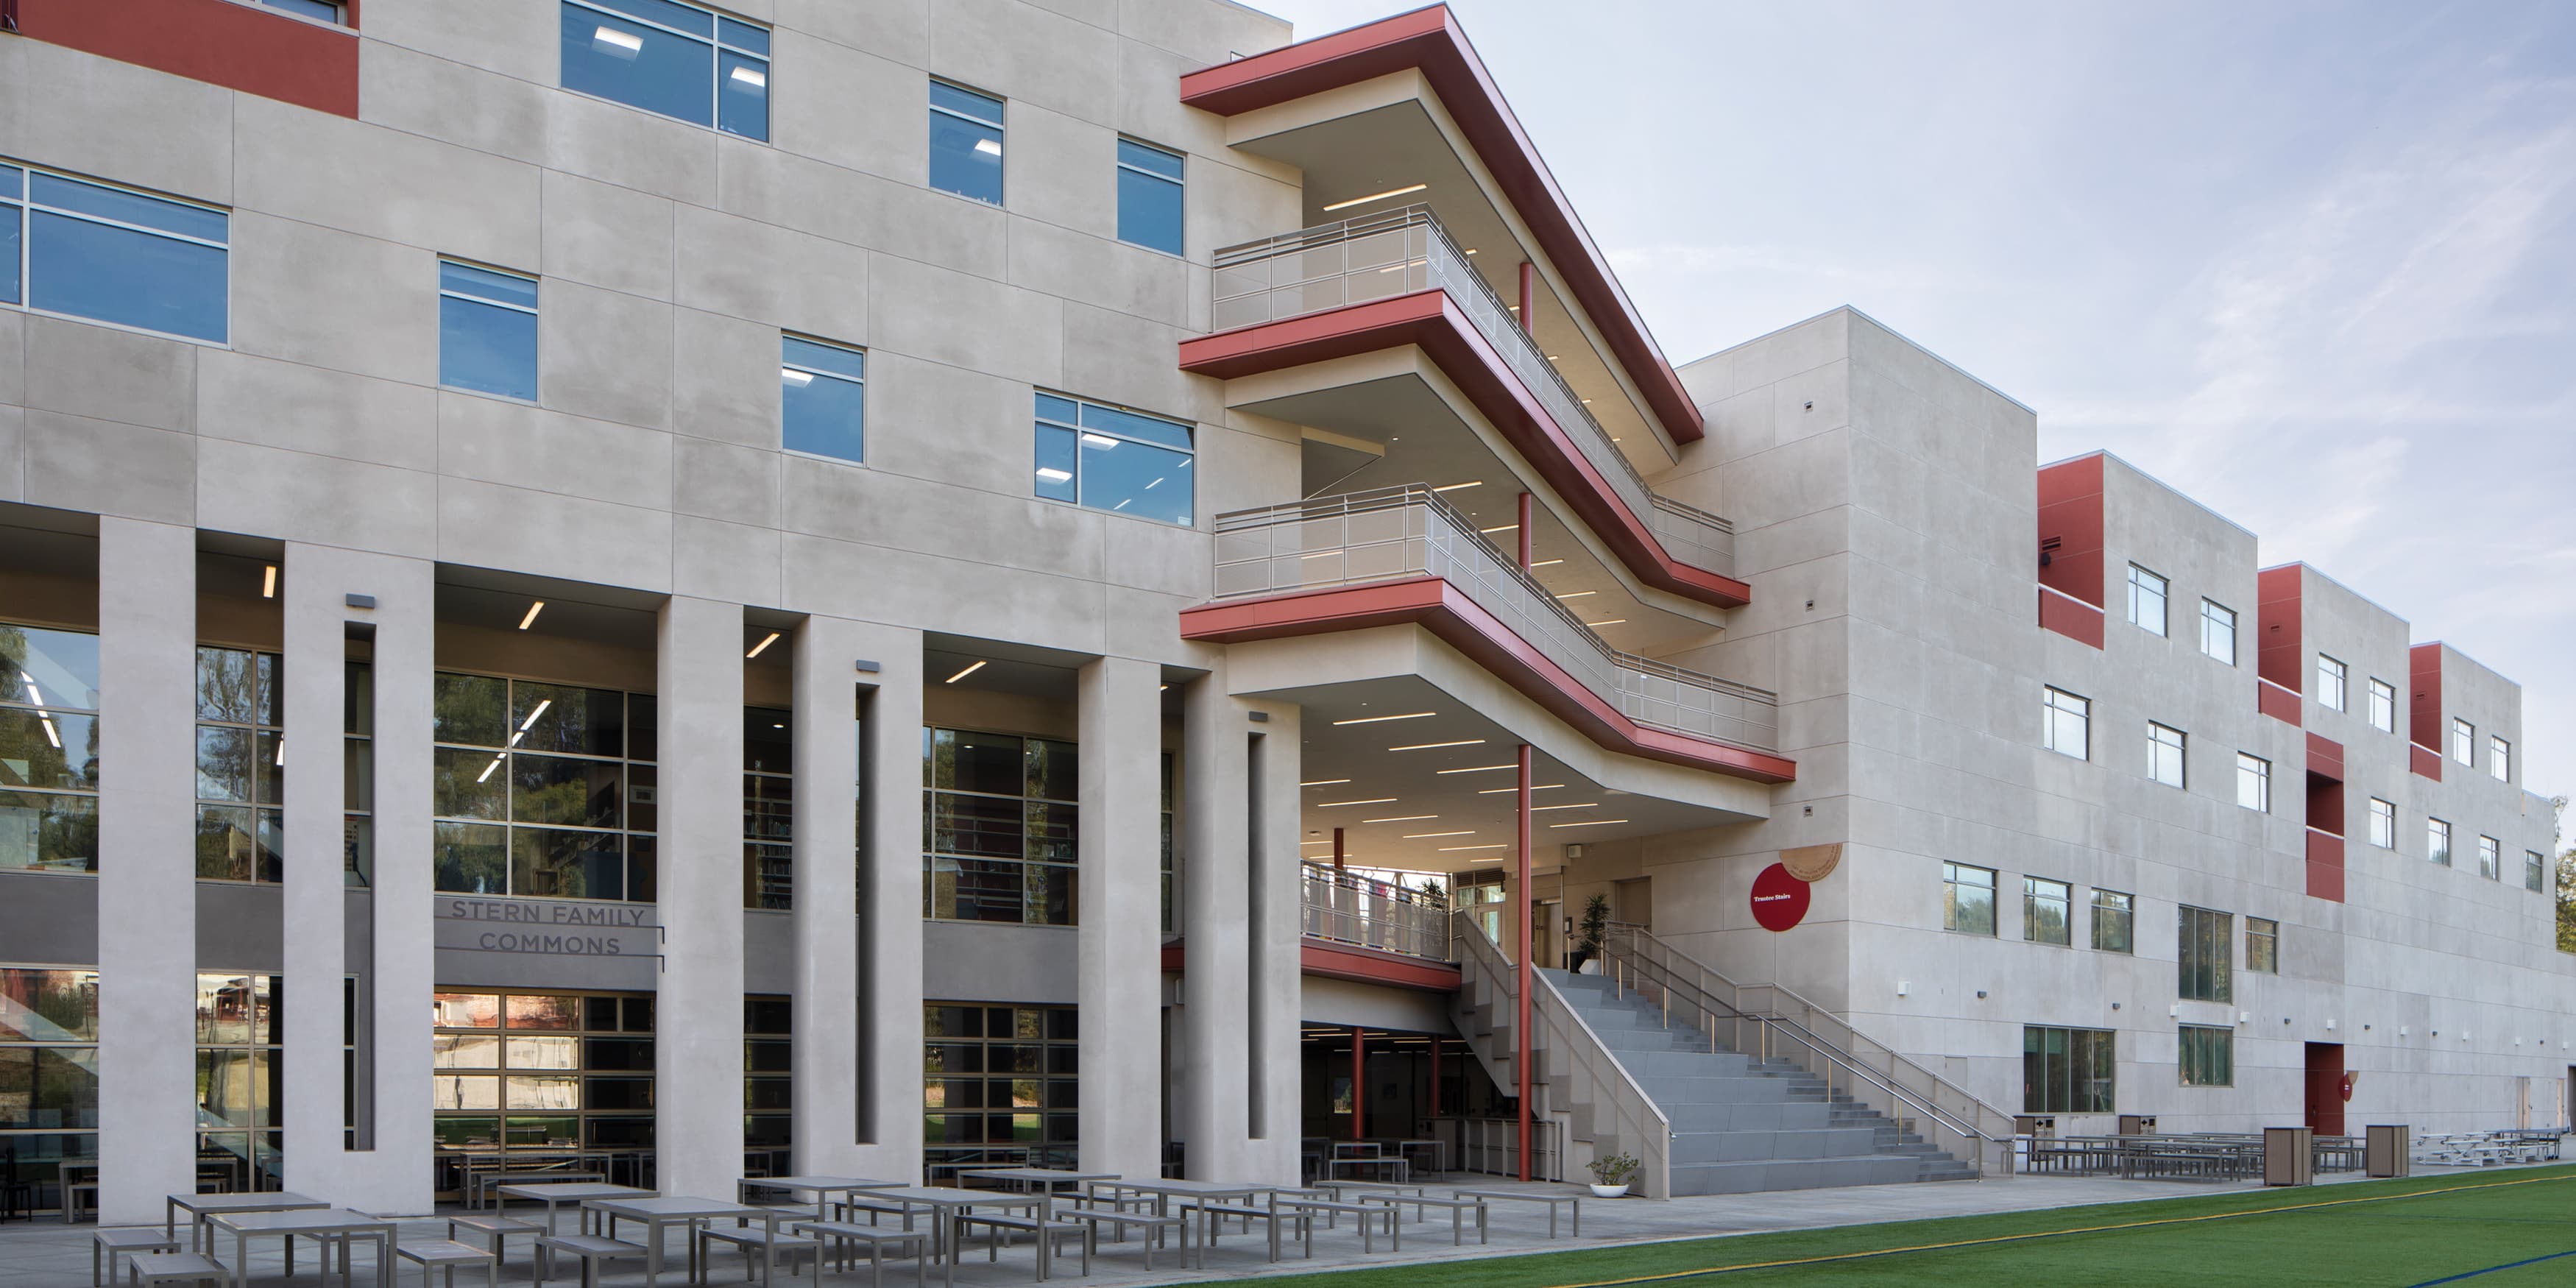 Daytime shot of exterior of Brentwood School in Los Angeles. Modern, contemporary architecture matched with red detailing and signage. 